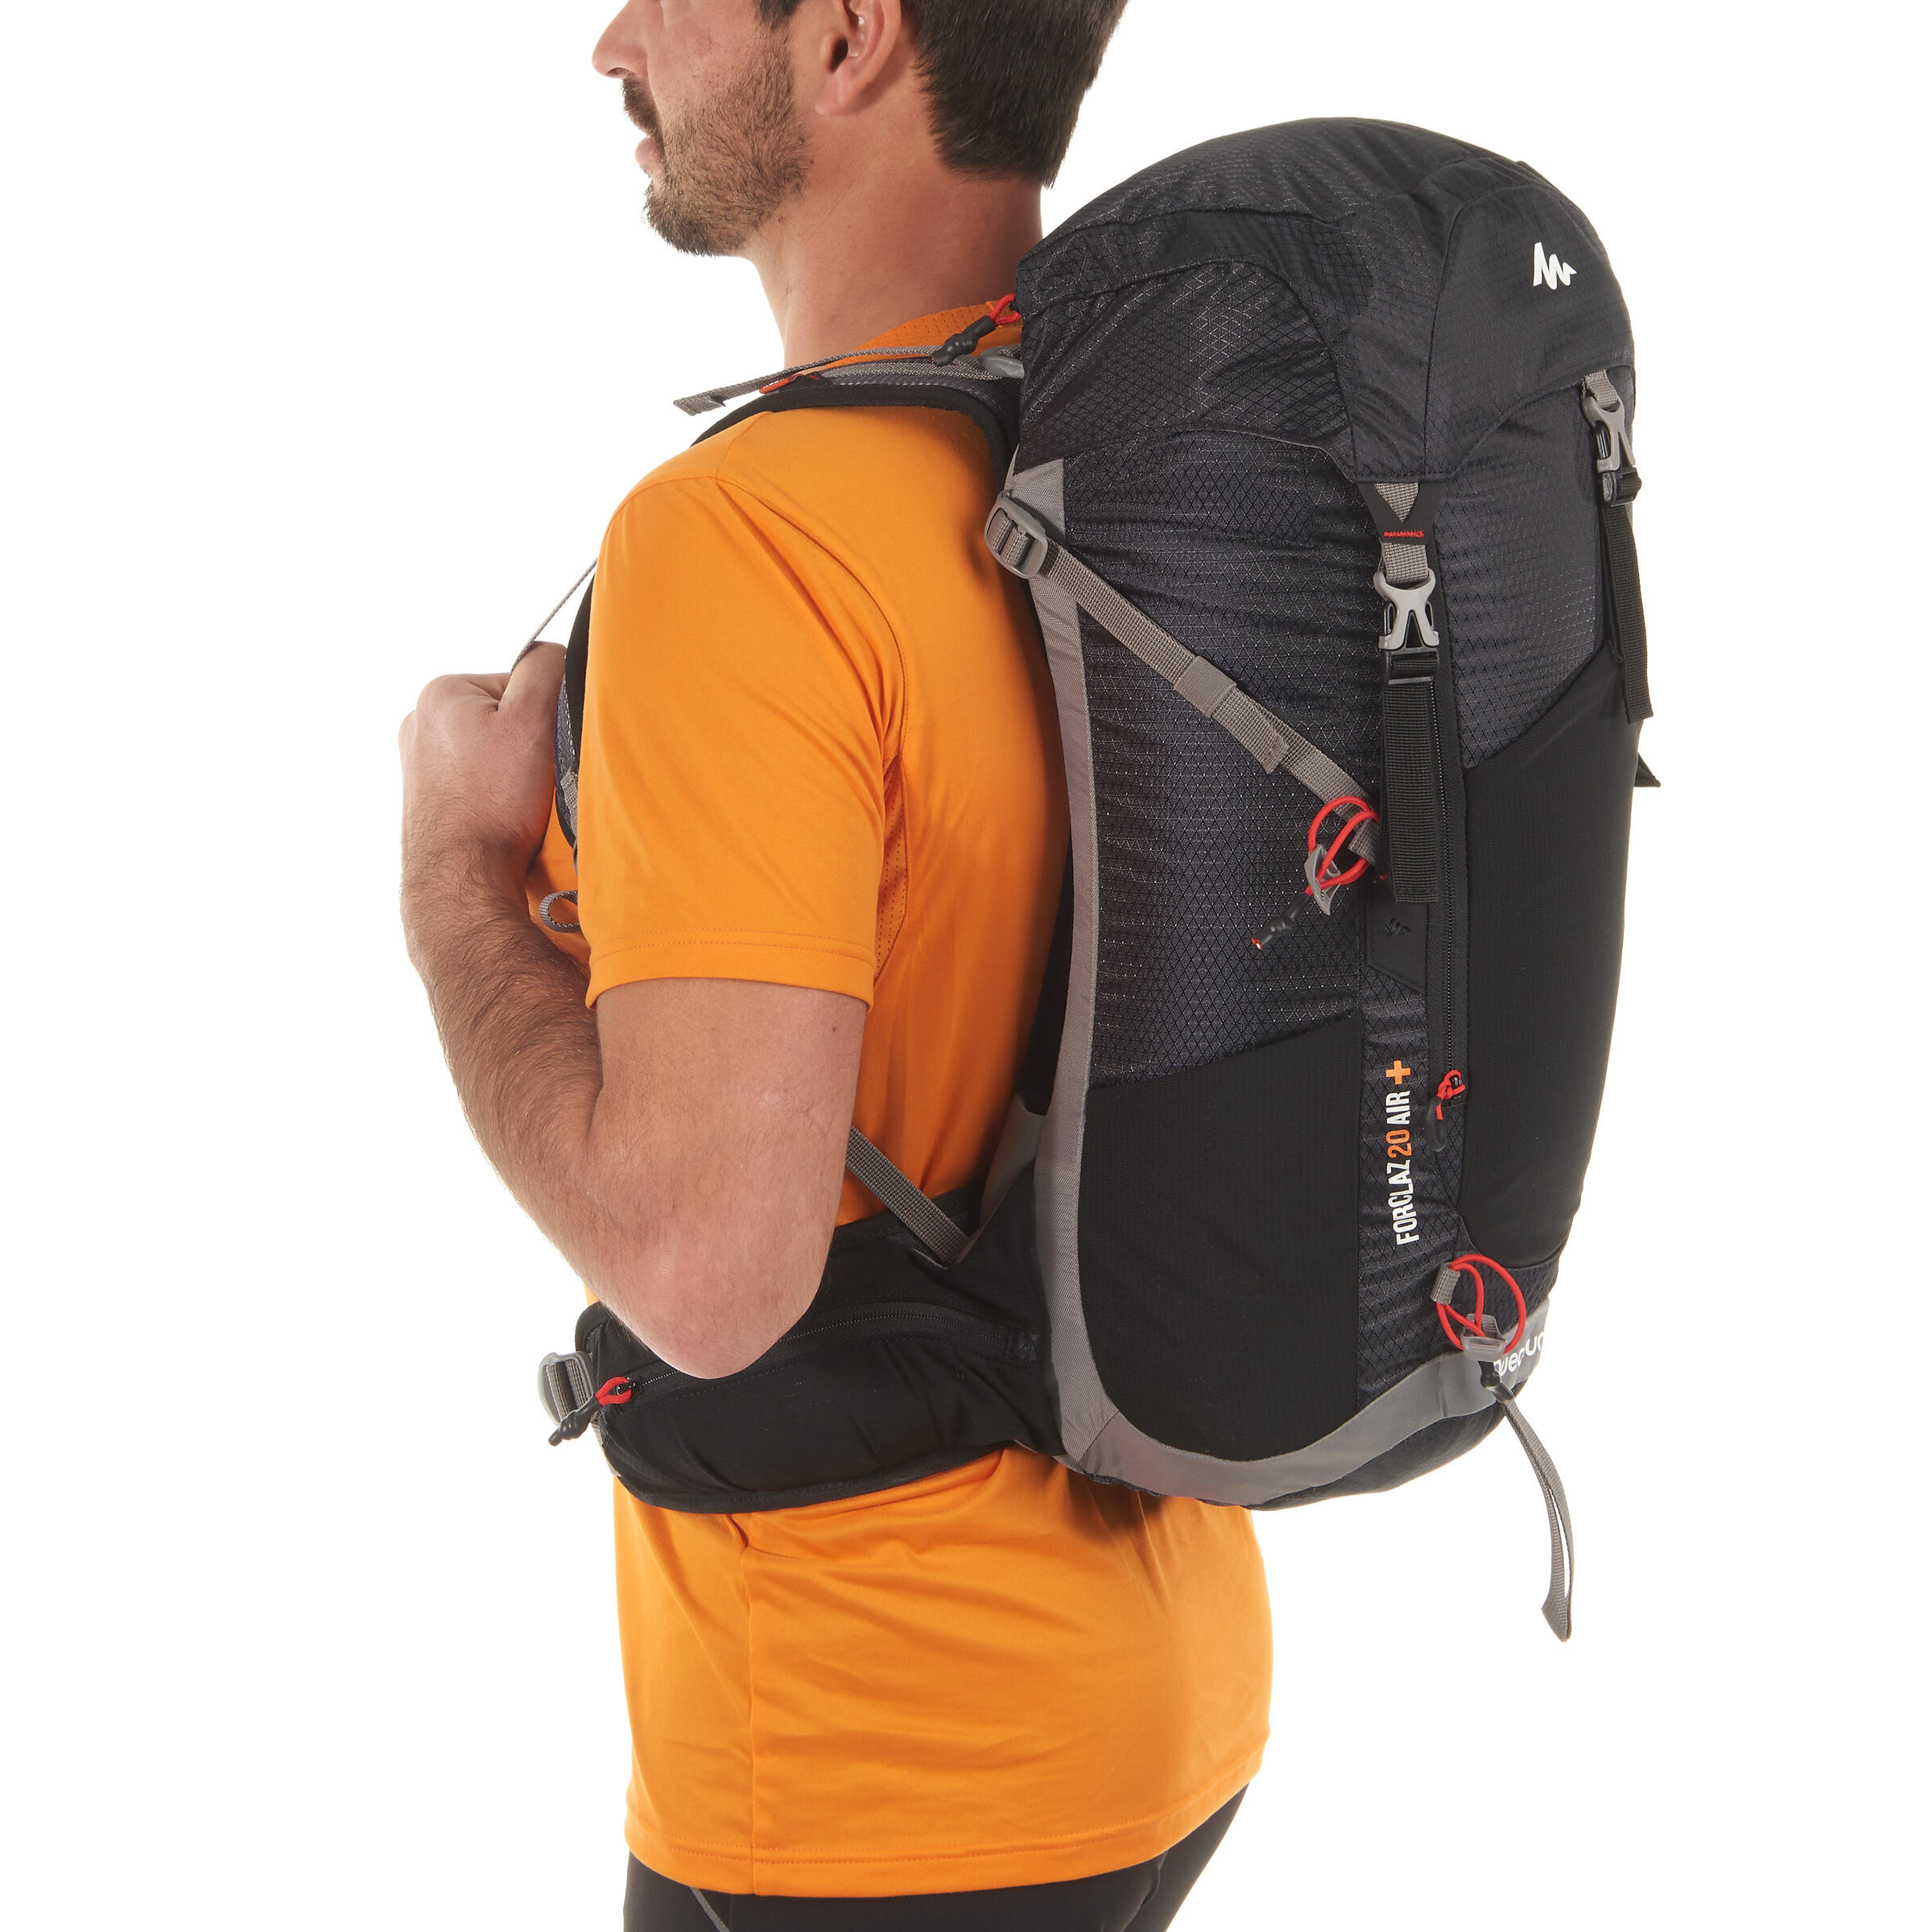 MH500 20 LITRE MOUNTAIN HIKING BACKPACK 